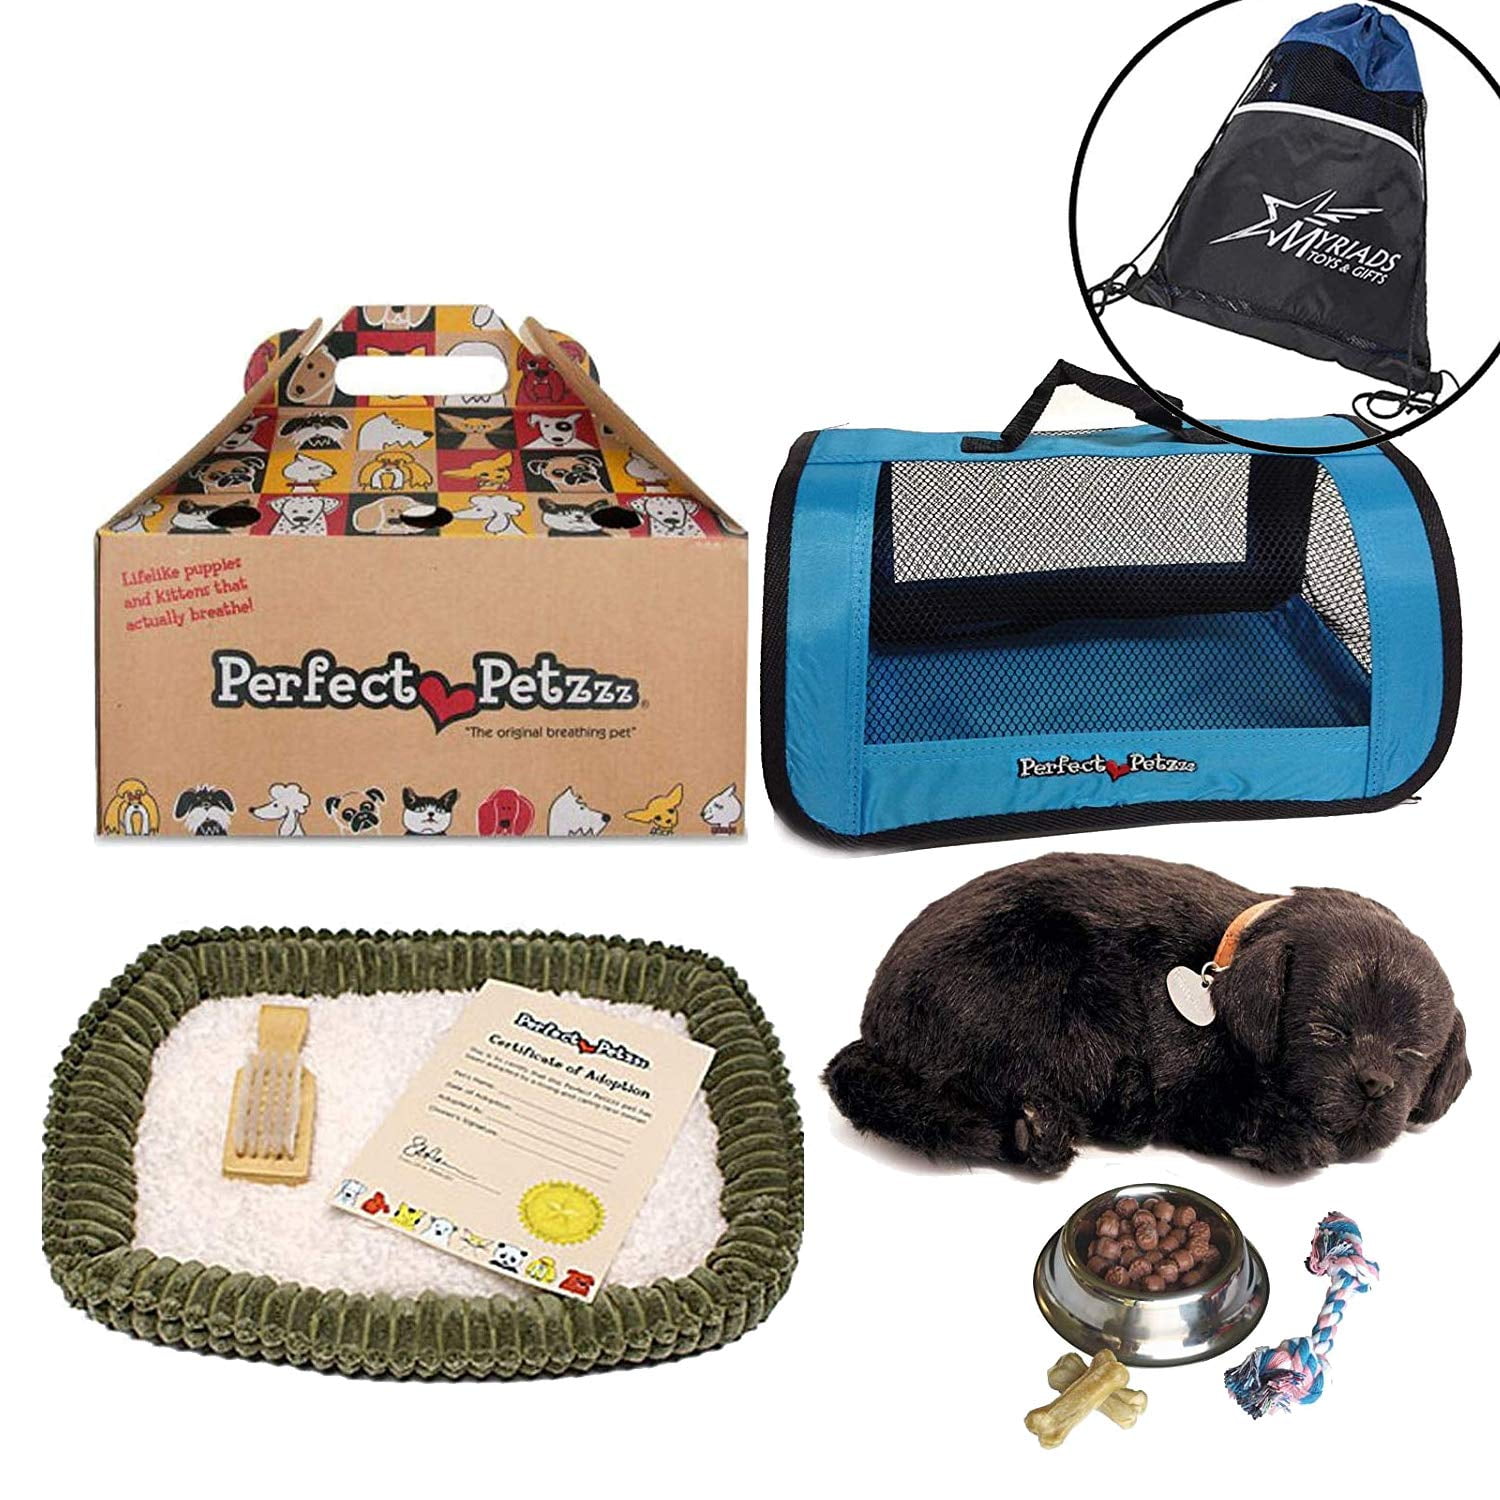 Perfect Petzzz BLACK LAB does Lifelike Breathing Battery Included-NEW! 